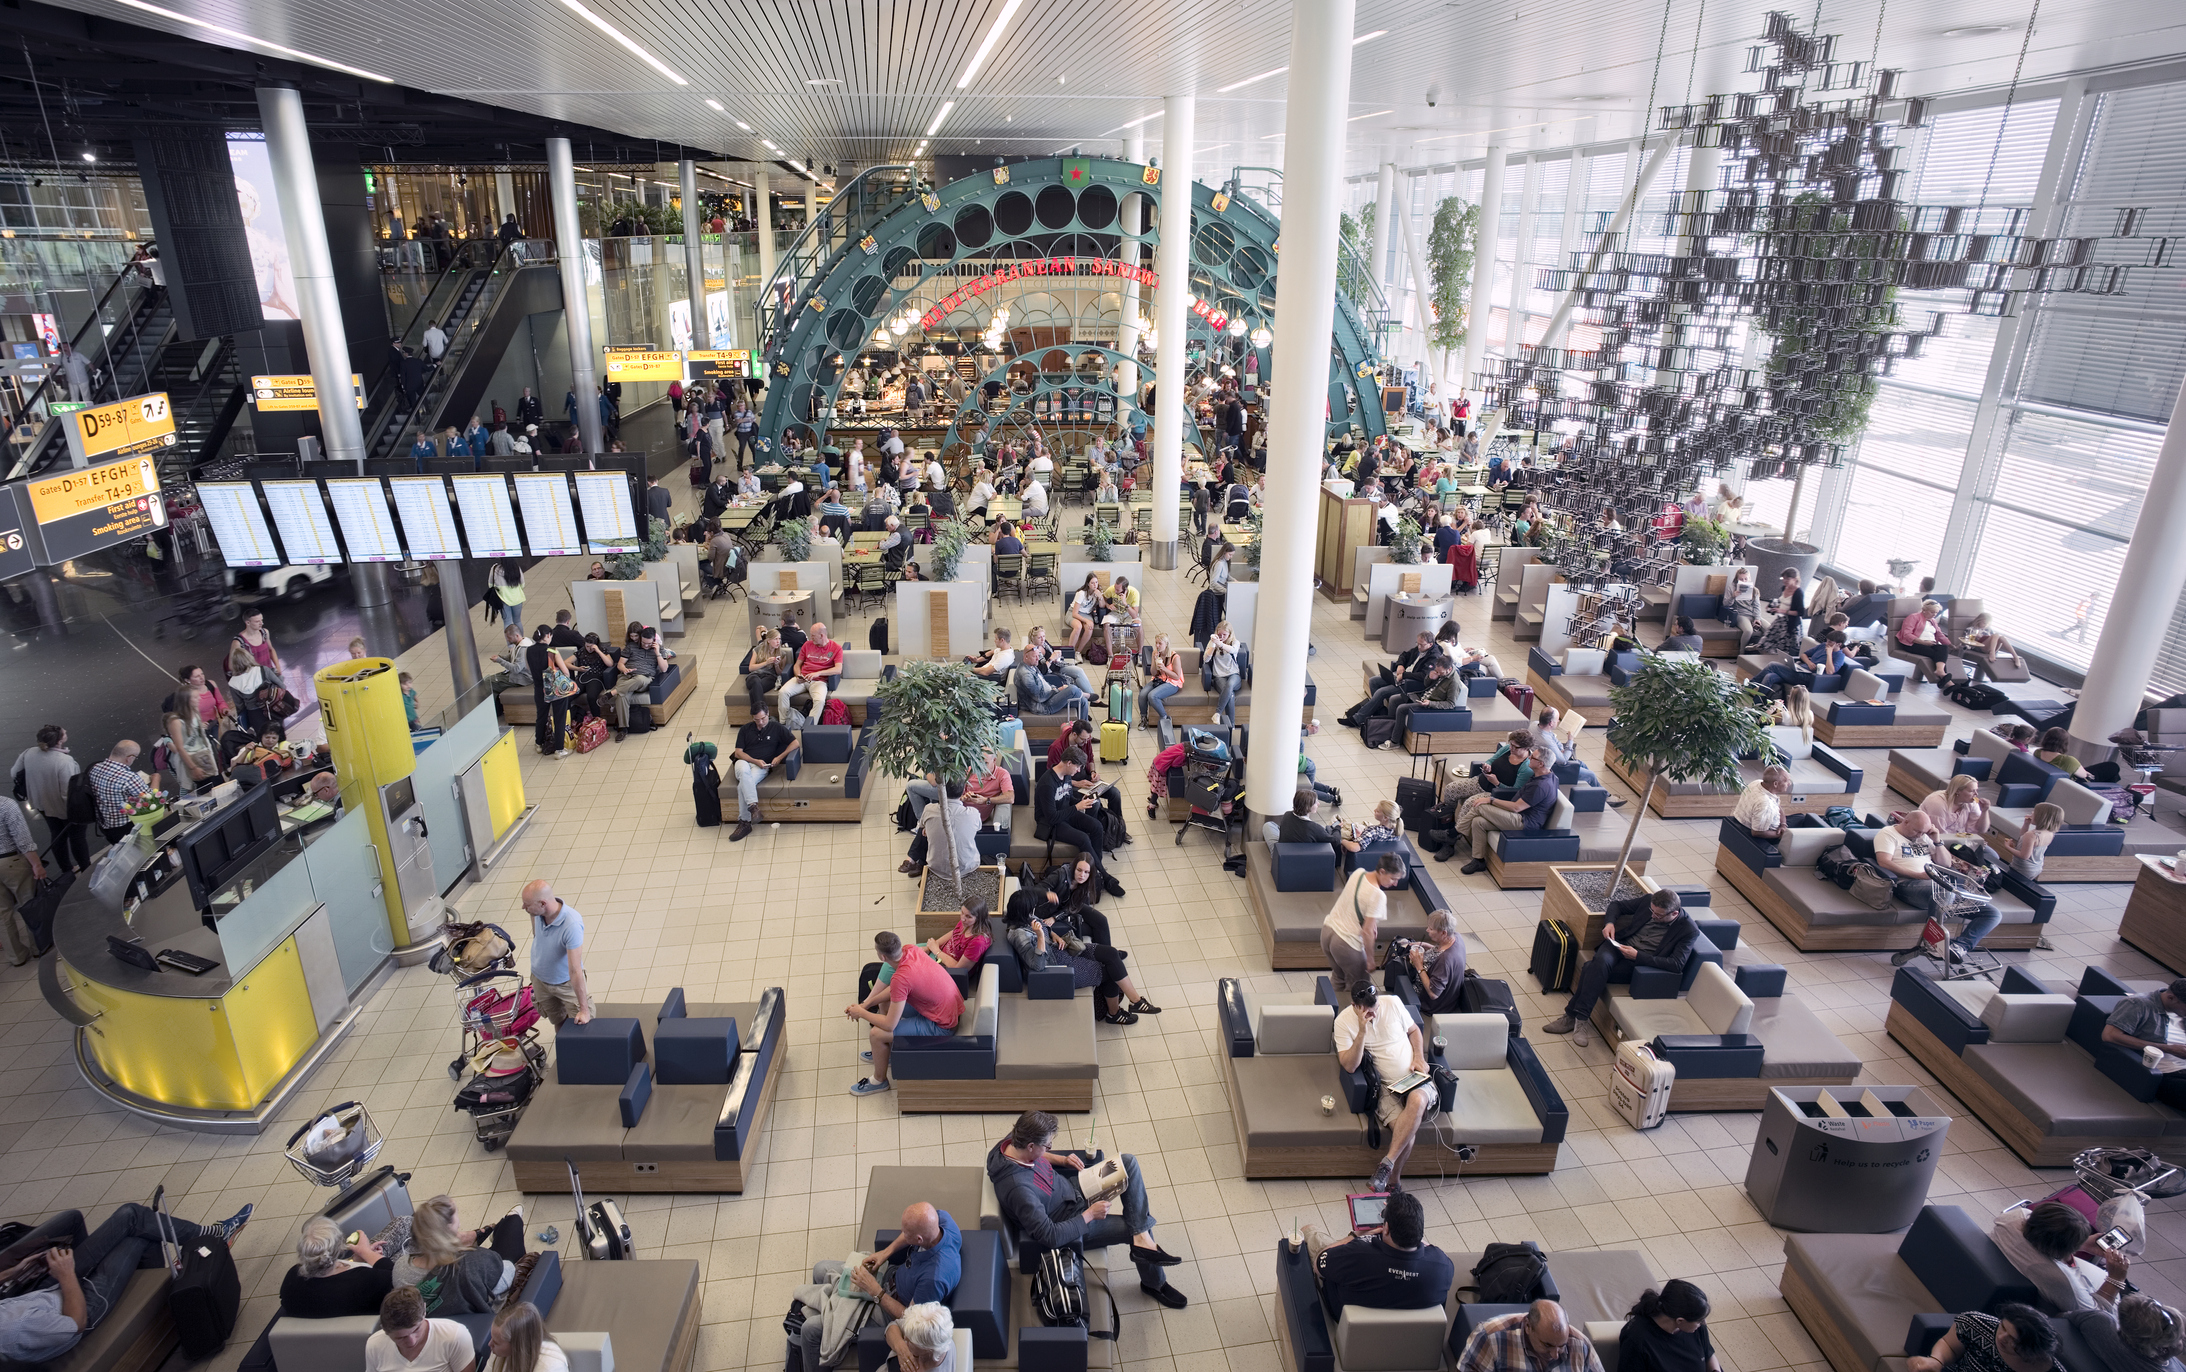 Travelers waiting for departure at one of the lounges (Schengen area) at Schiphol Airport, Amsterdam, The Netherlands. (EschCollection—Getty Images)